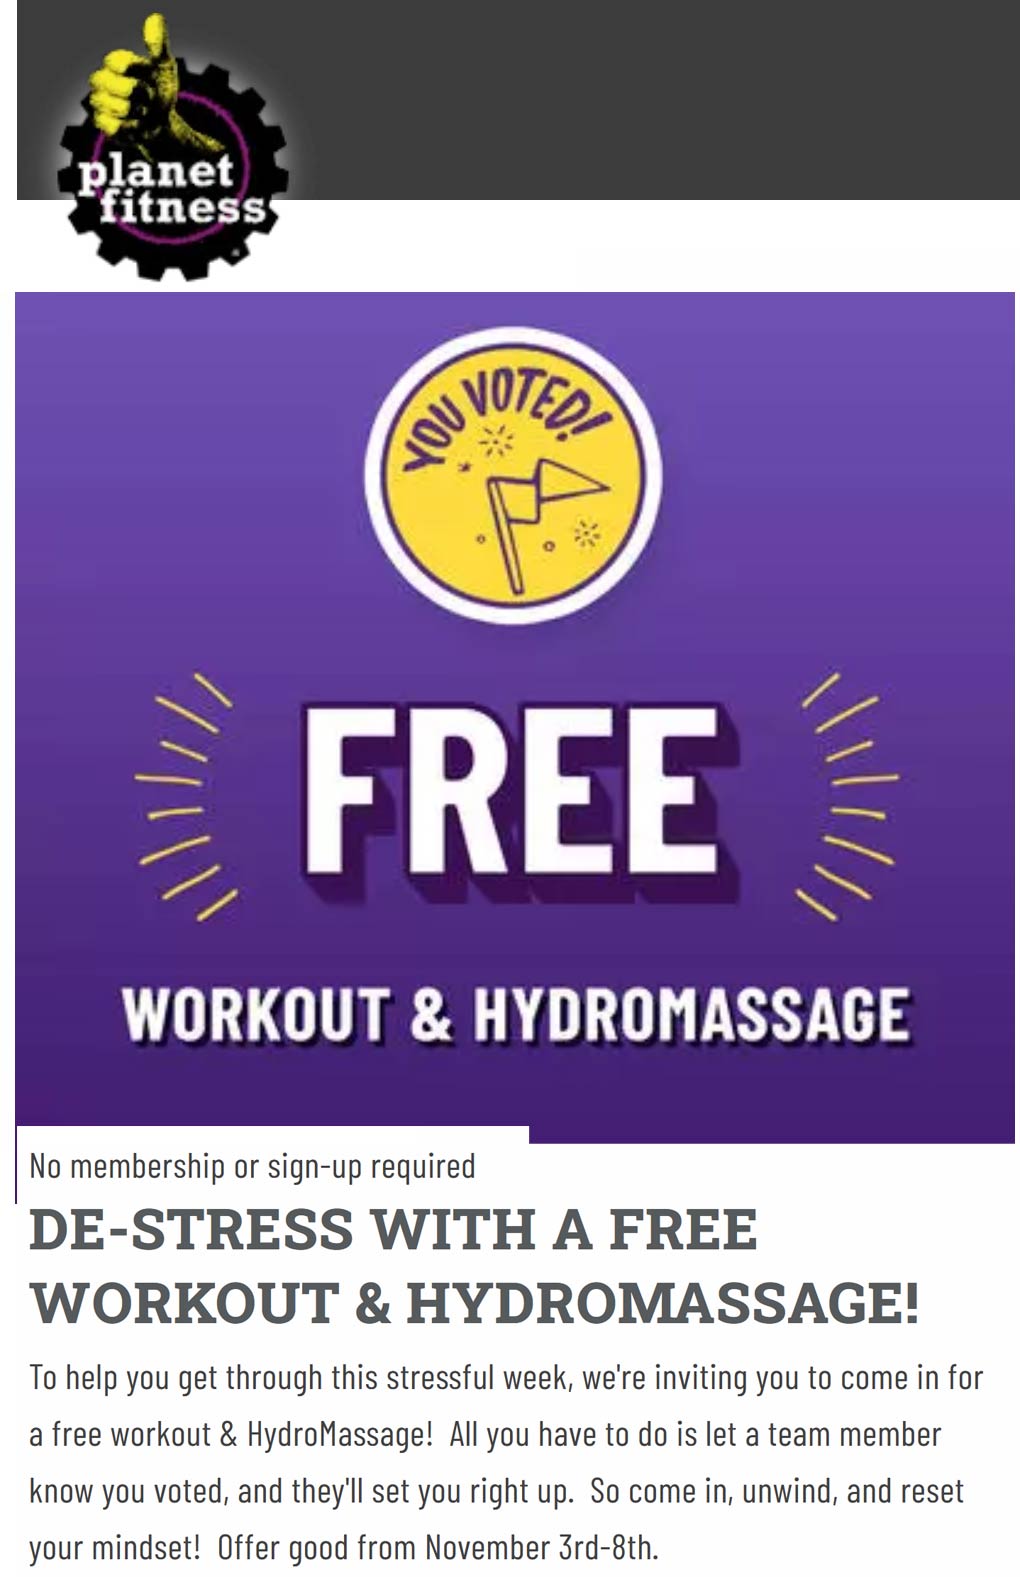 Free hydromassage + workout at Fitness gyms The